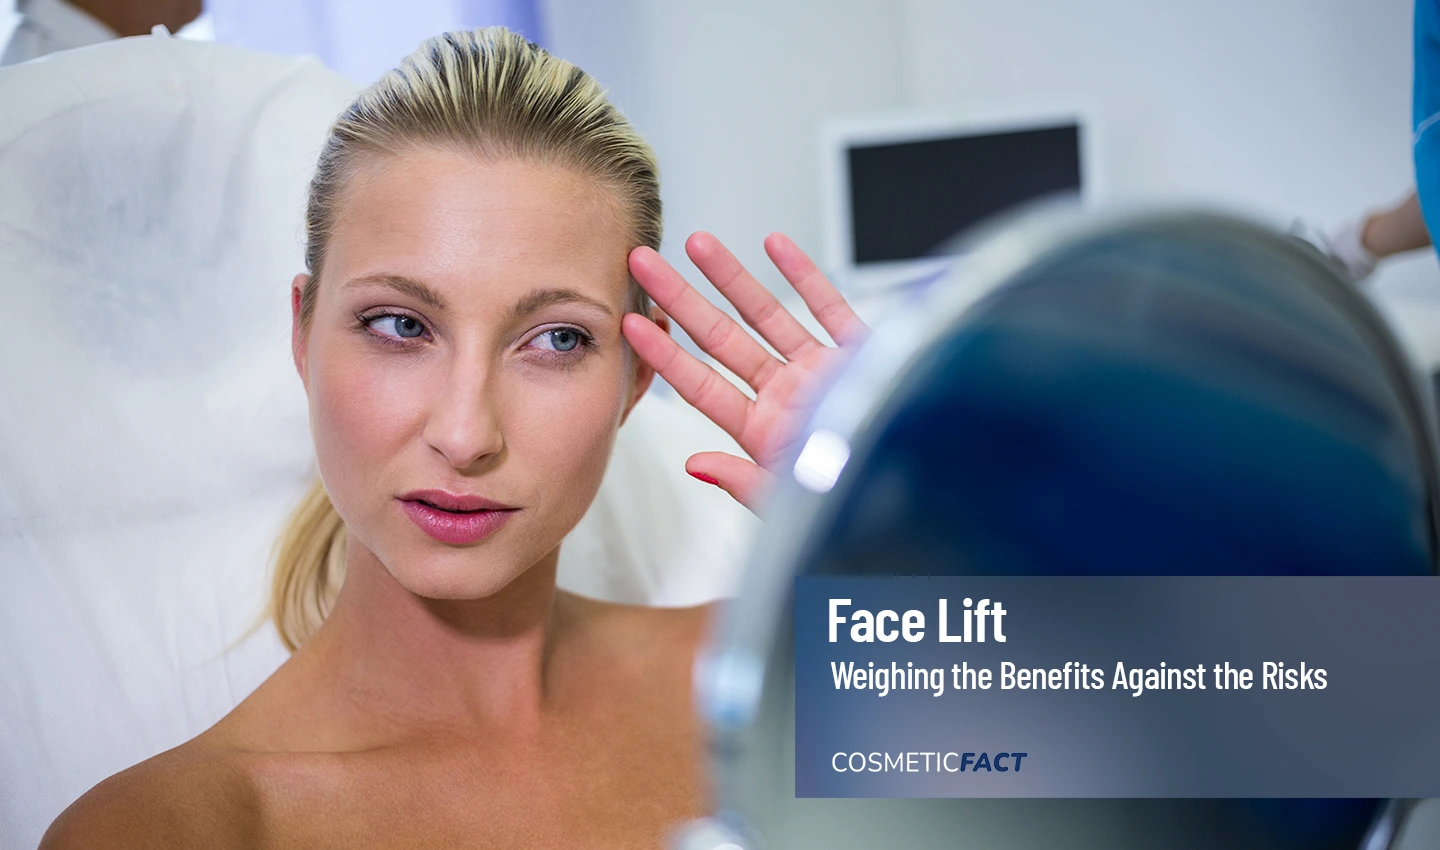 Woman evaluates herself, unsure if facelift surgery is worth the benefits and risks.